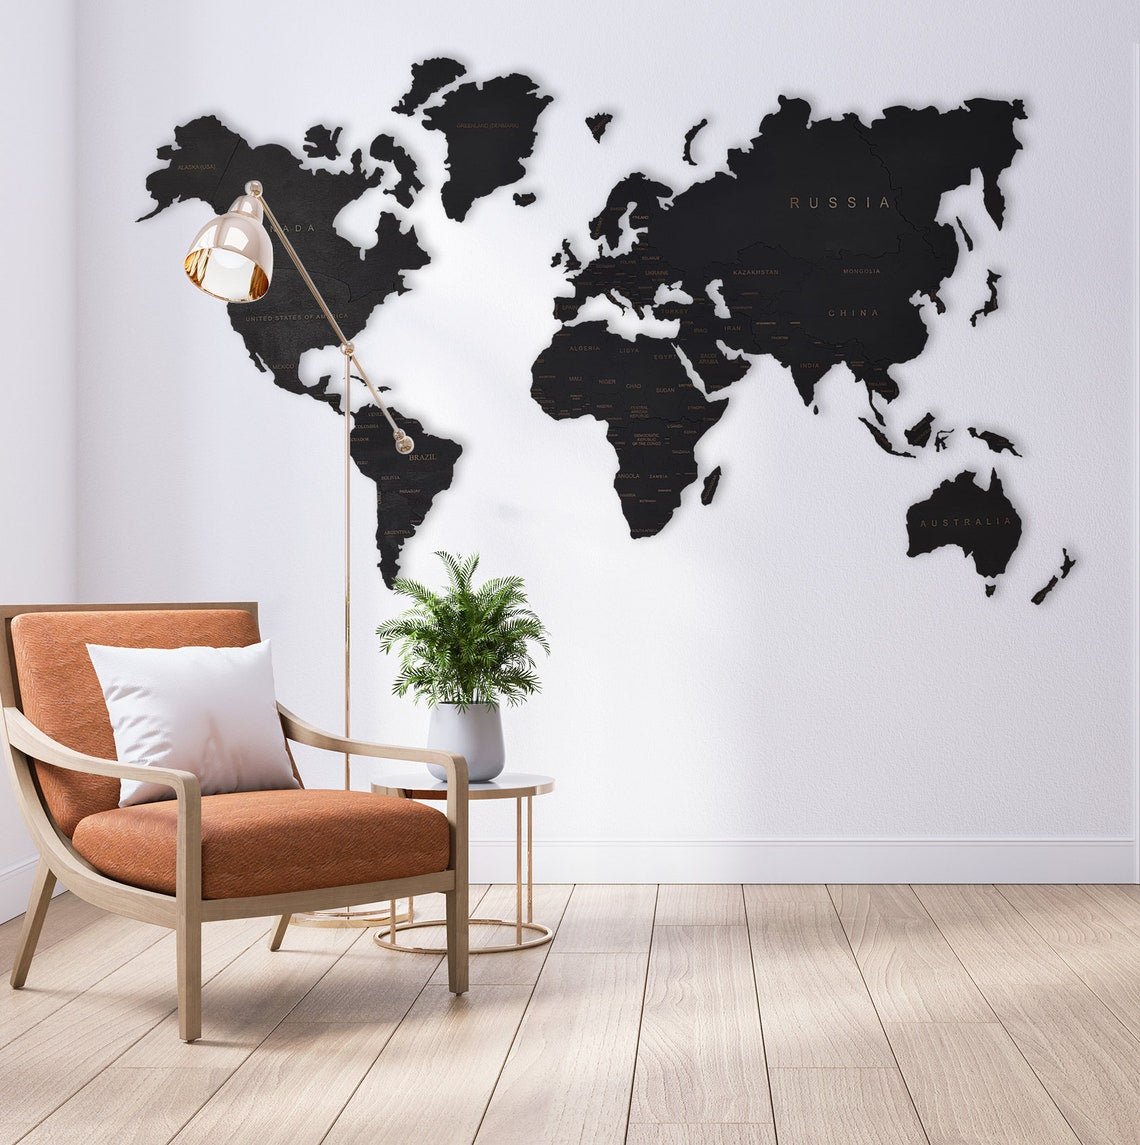 Wooden World Map, Wood Map, Wall Art Decor, Map of India